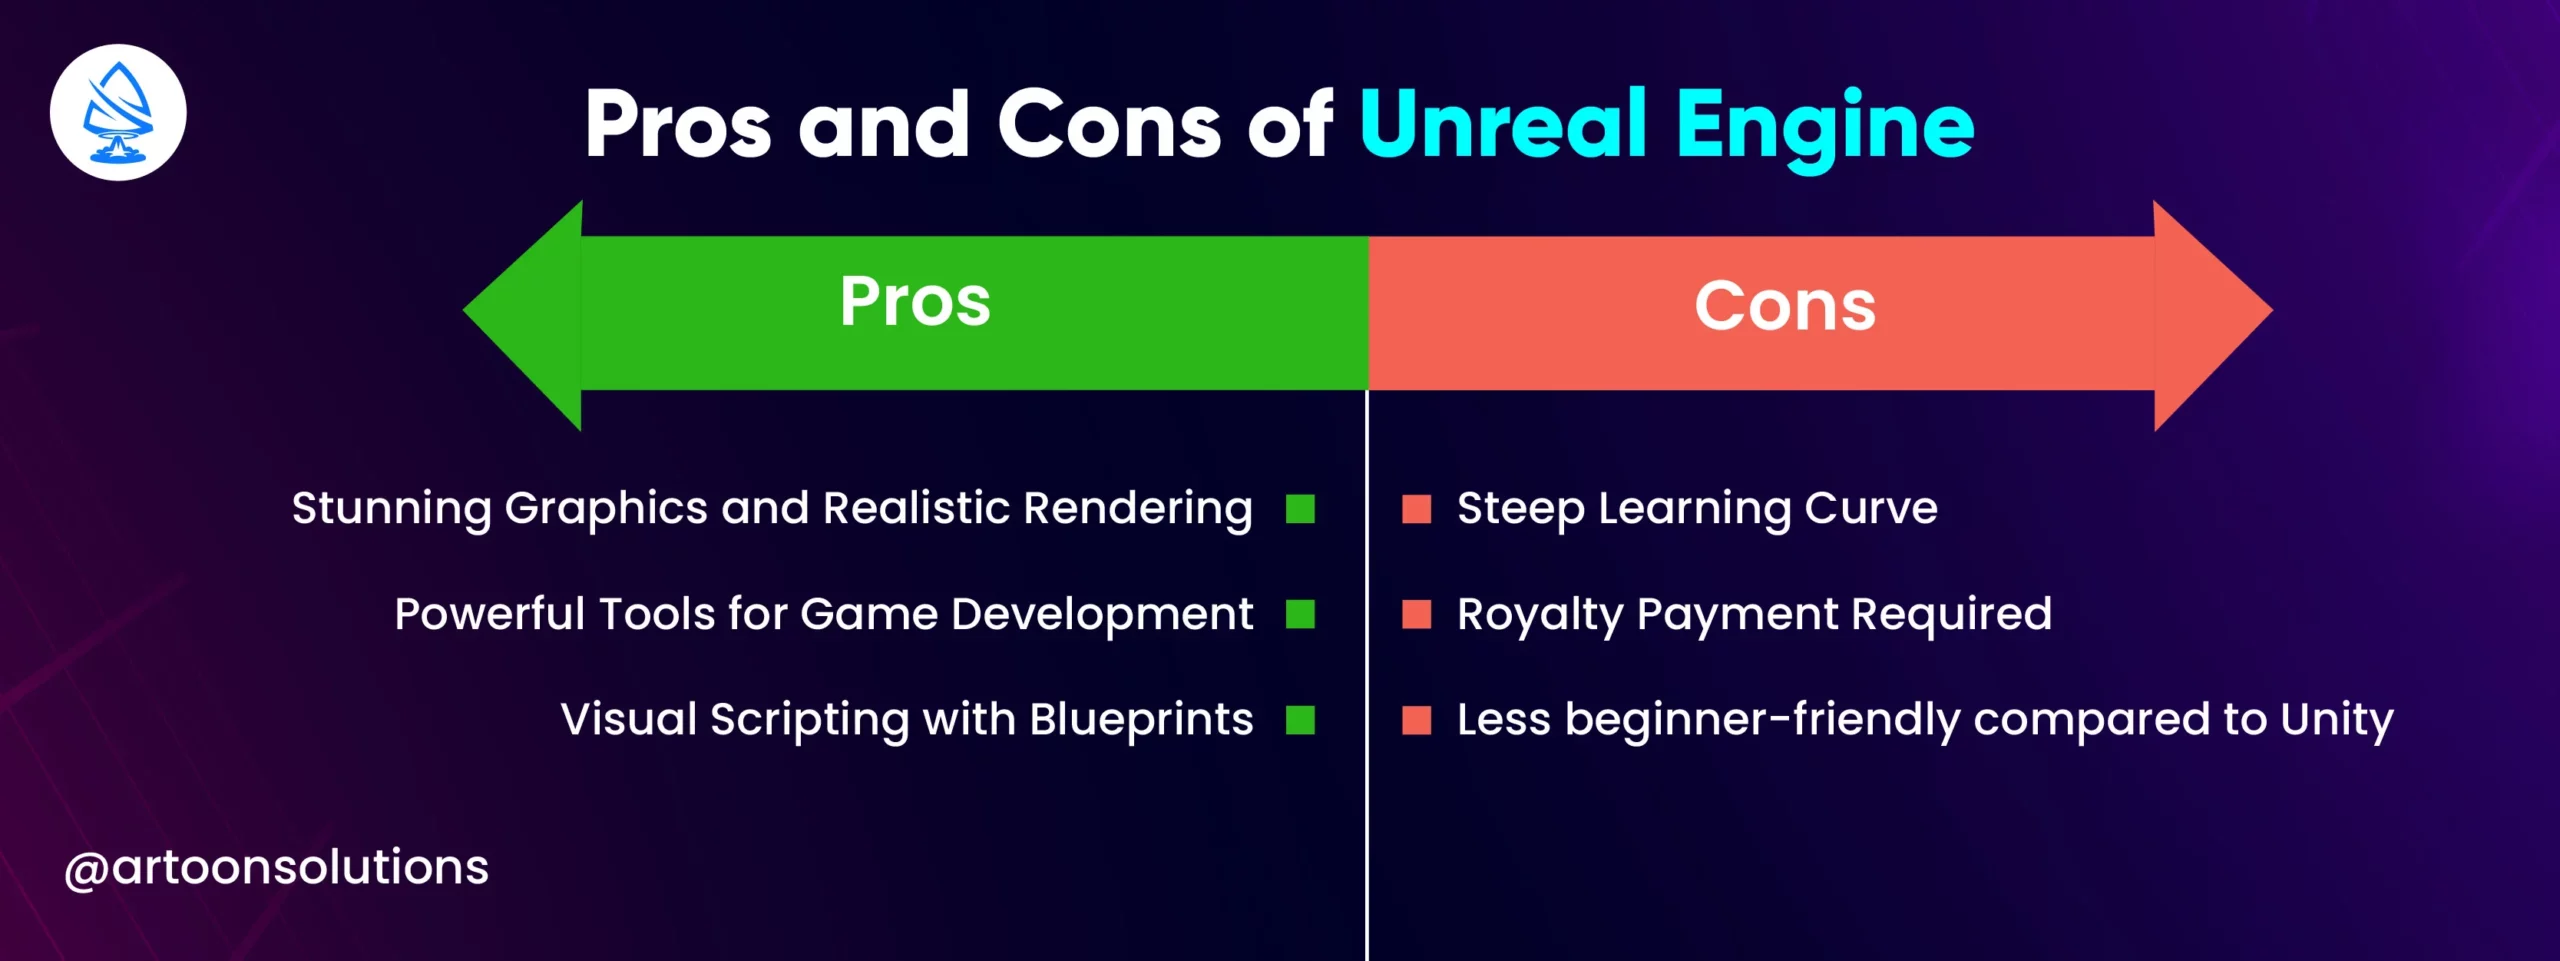 Pros and Cons of Unreal Engine